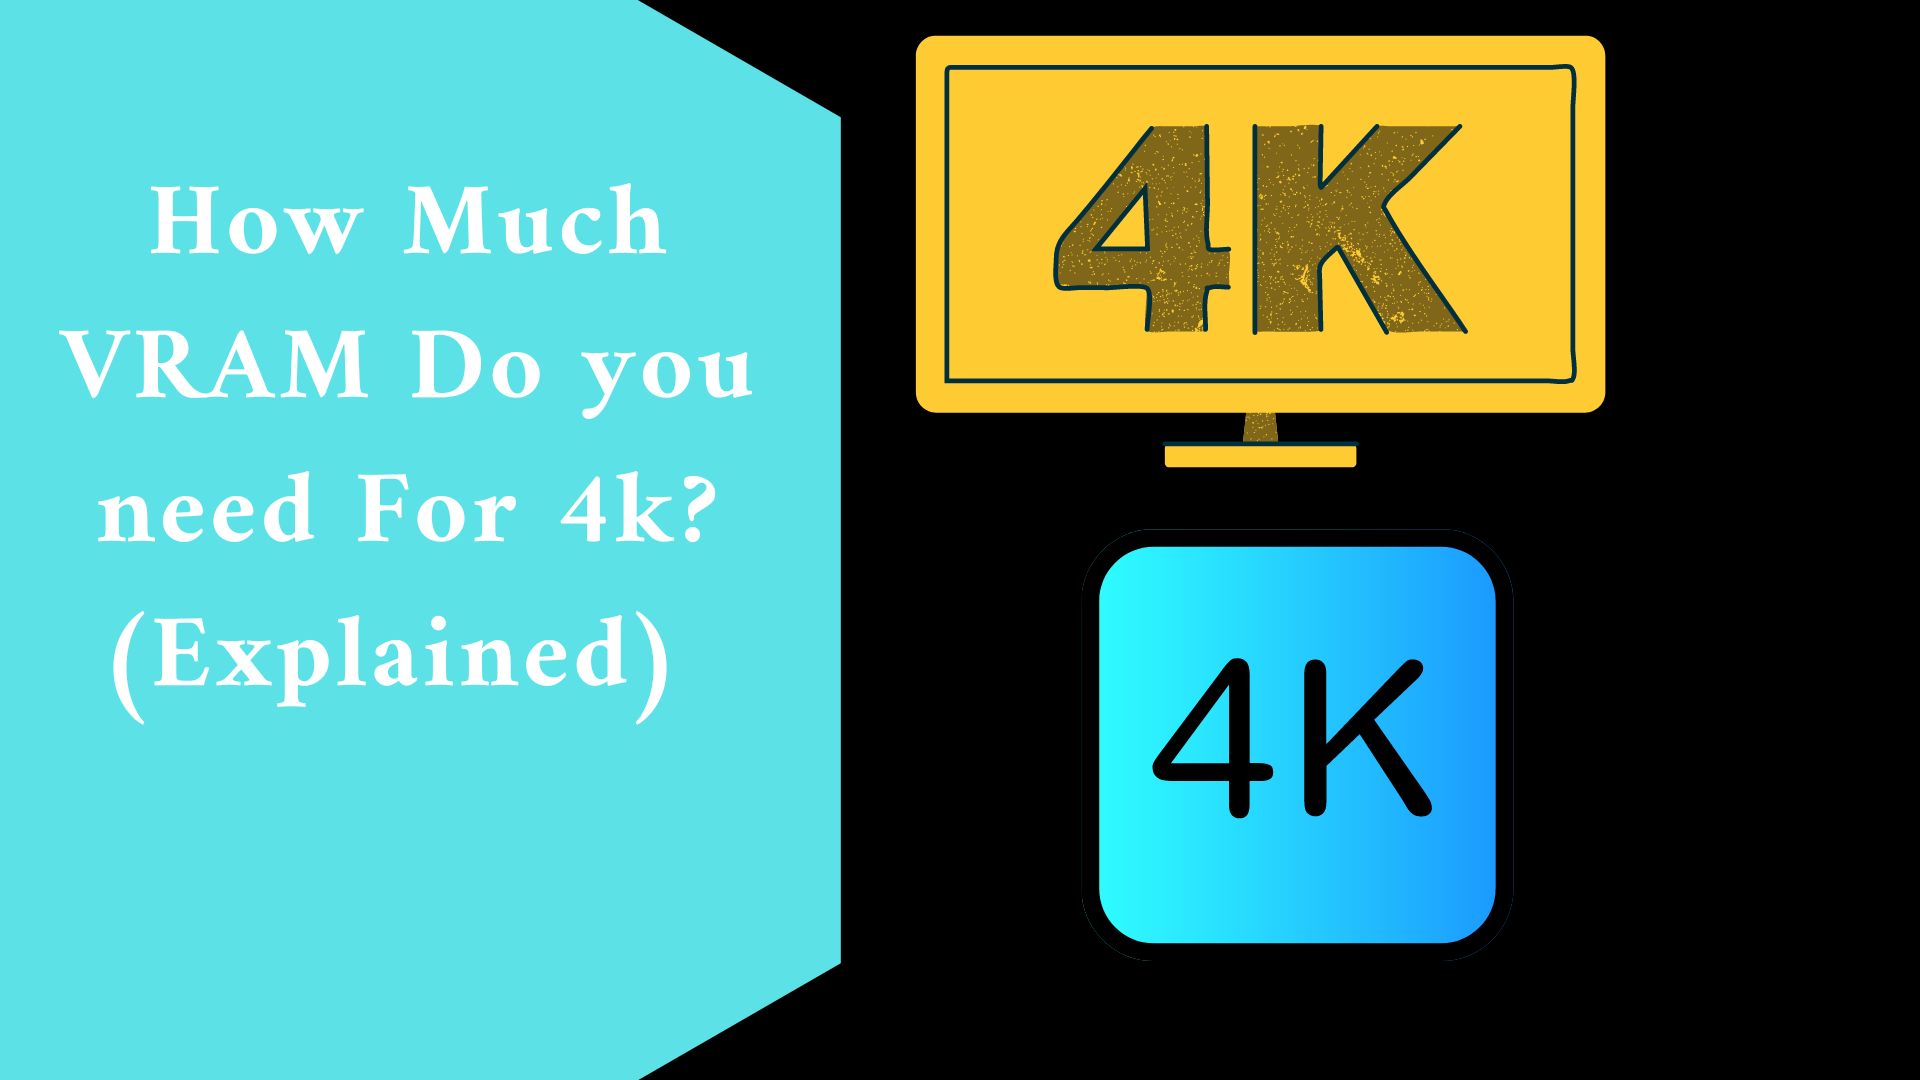 How Much VRAM Do you need For 4k? (Explained)